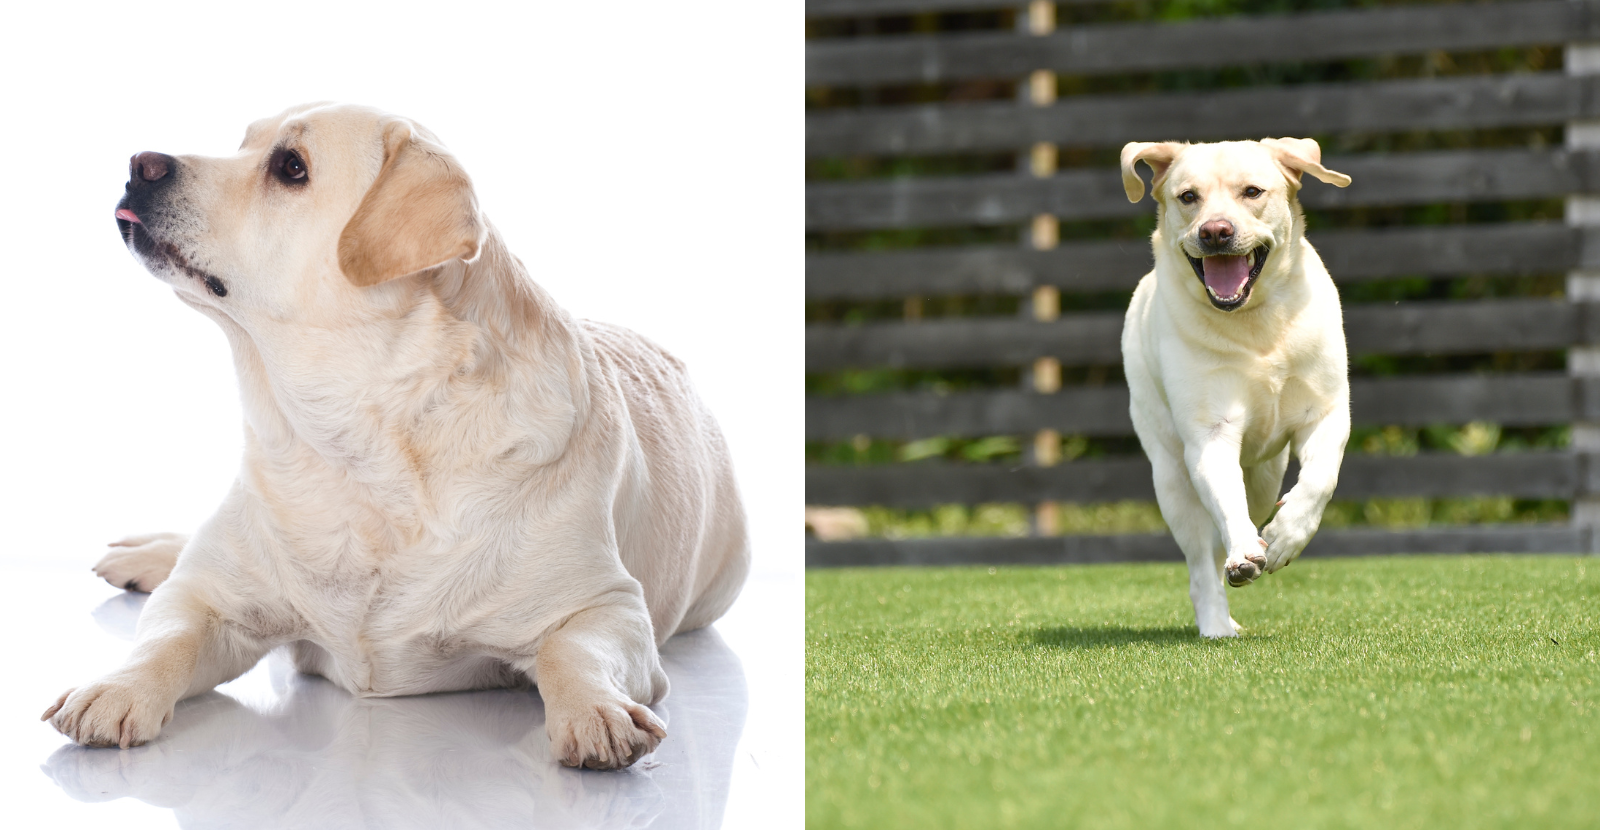 Is Your Dog Fit or Fat?